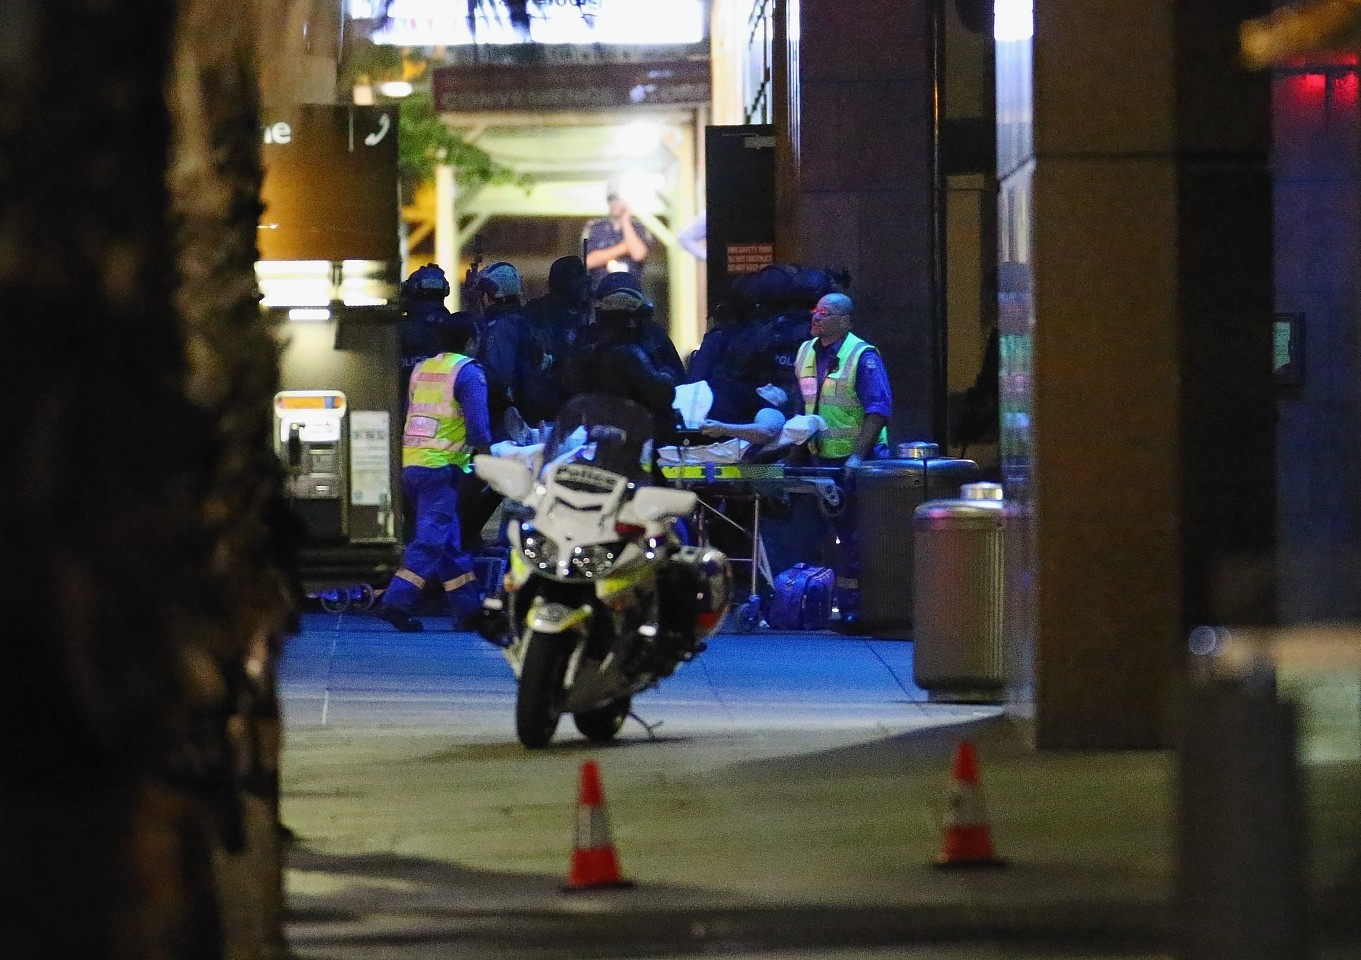 Police bring an end to the Sydney siege